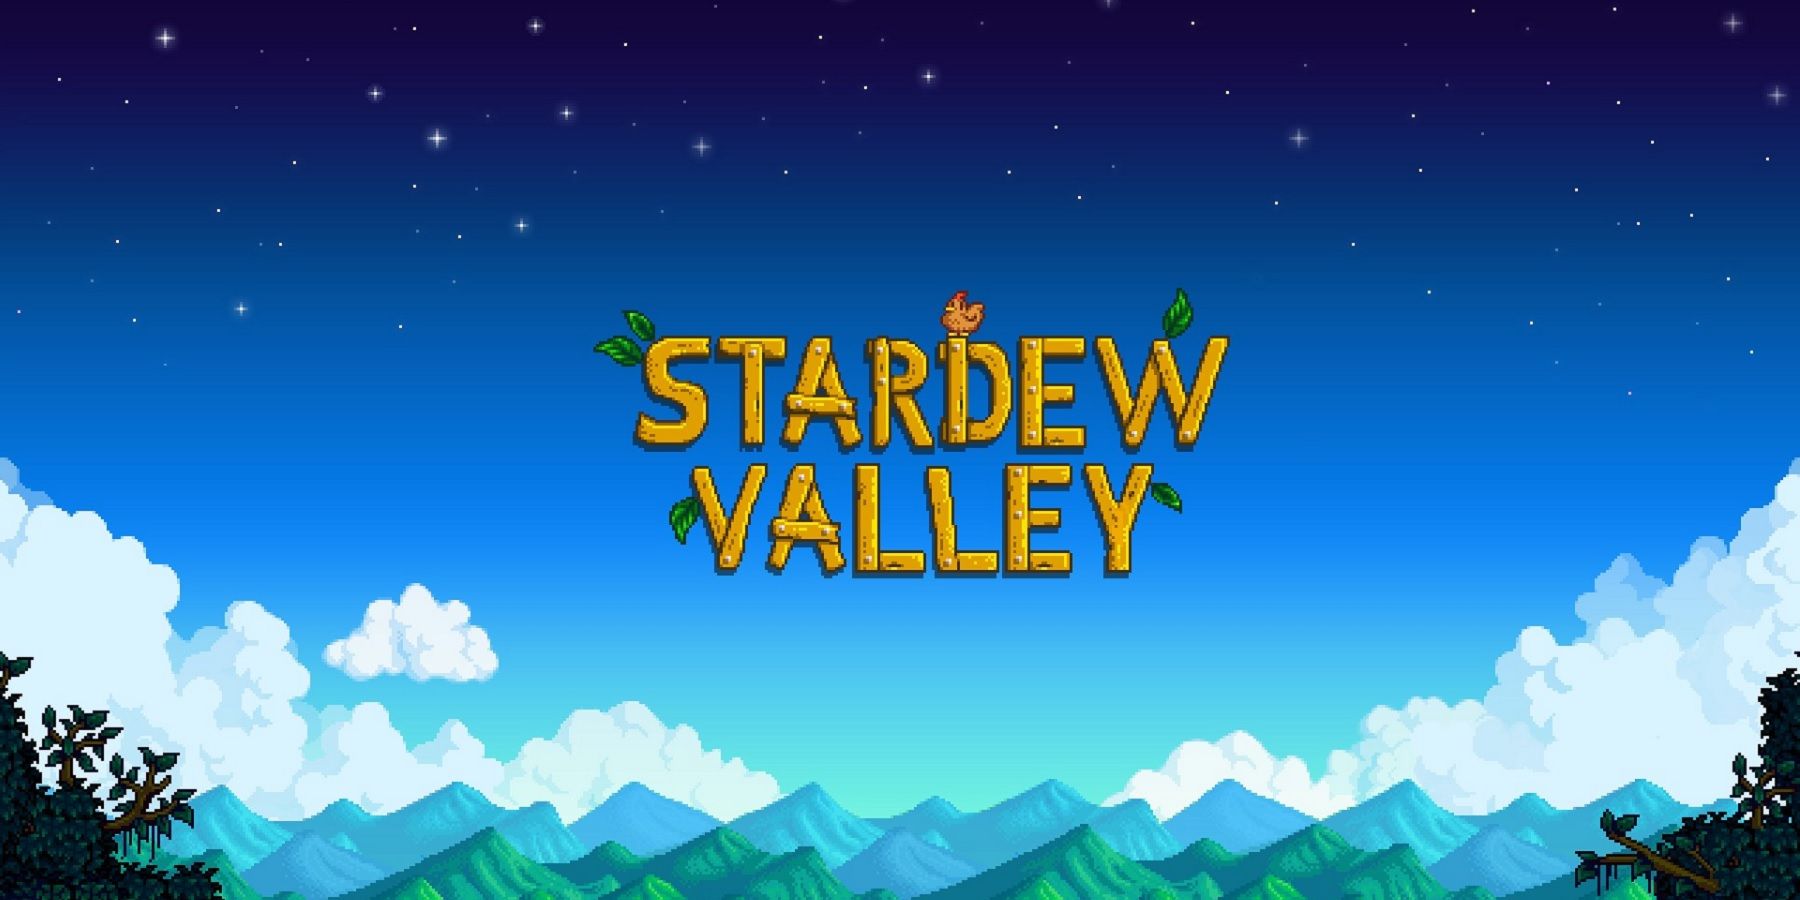 Stardew Valley Creator Gives Small Update on Mobile 1.5 and More